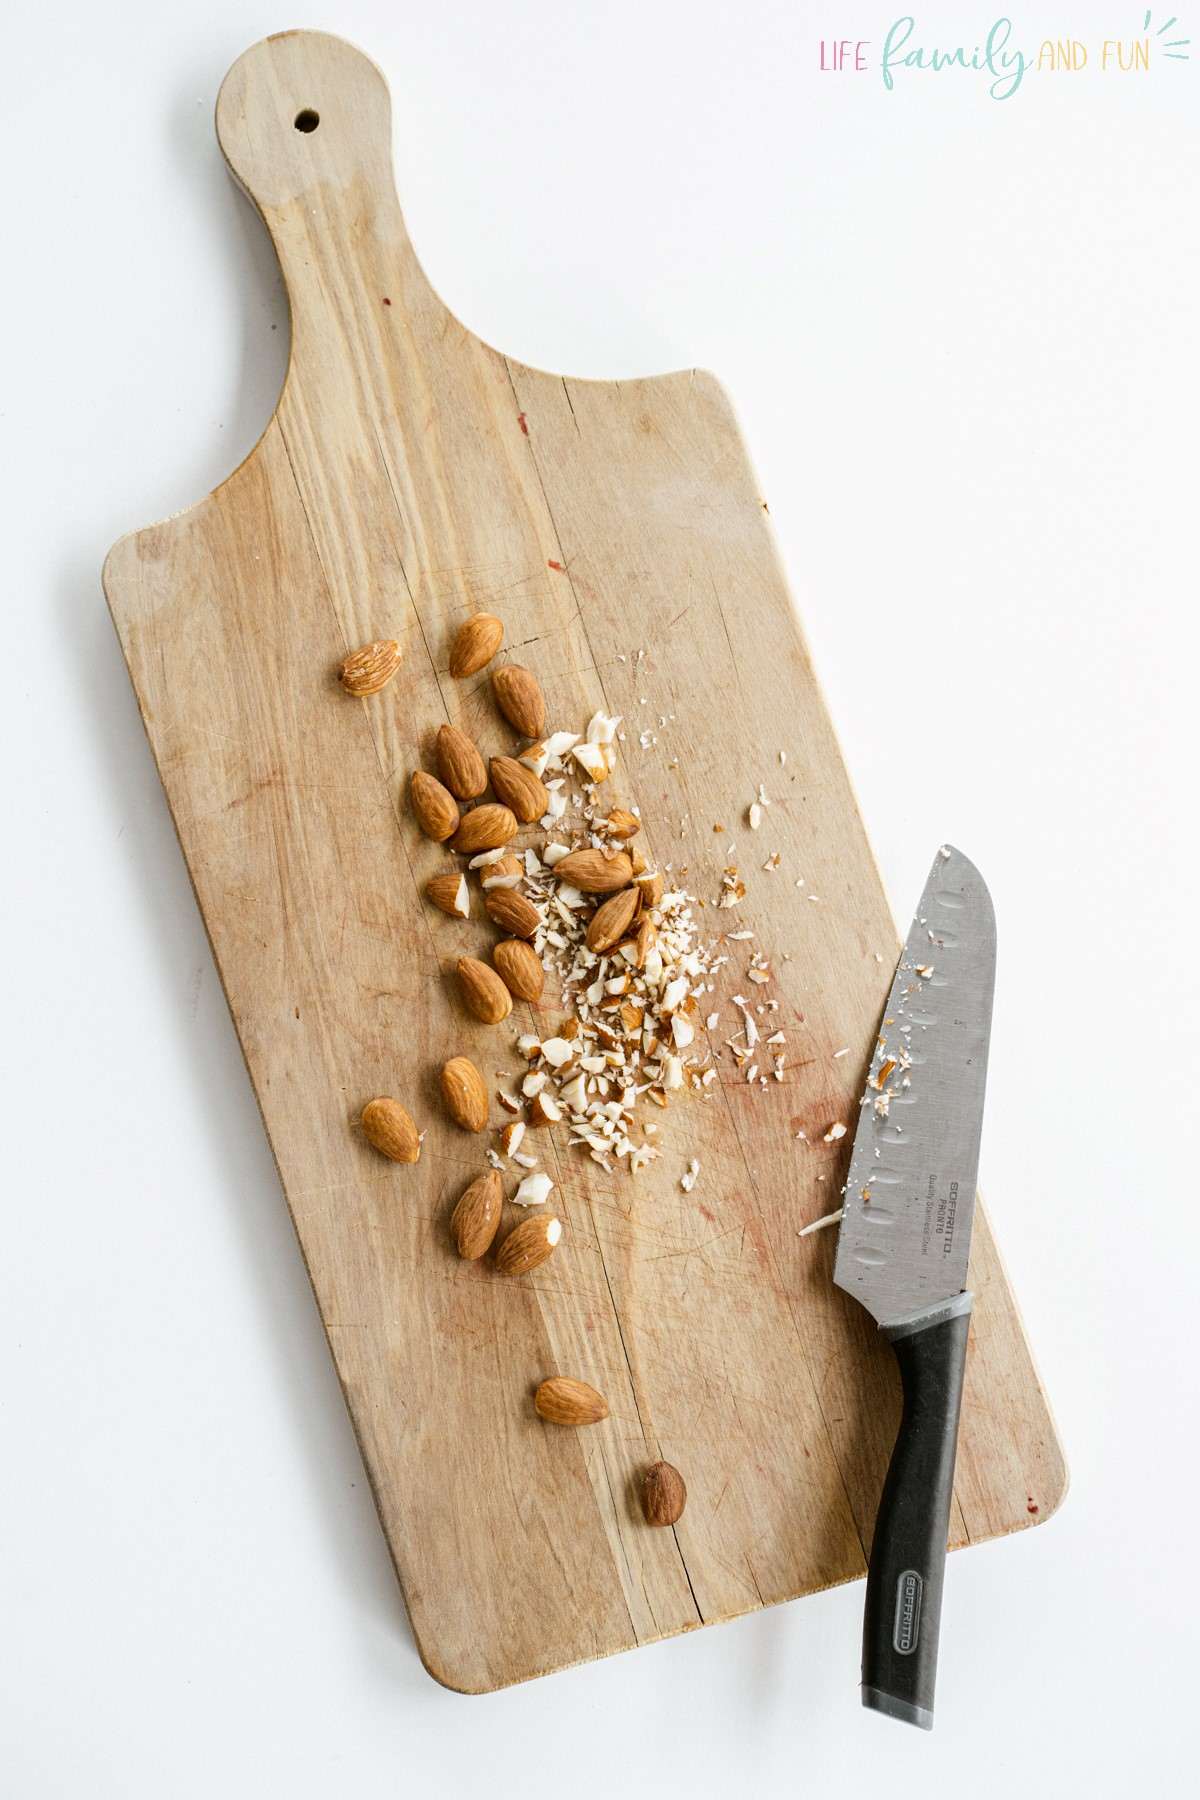 chopping almonds on cutting board with knife